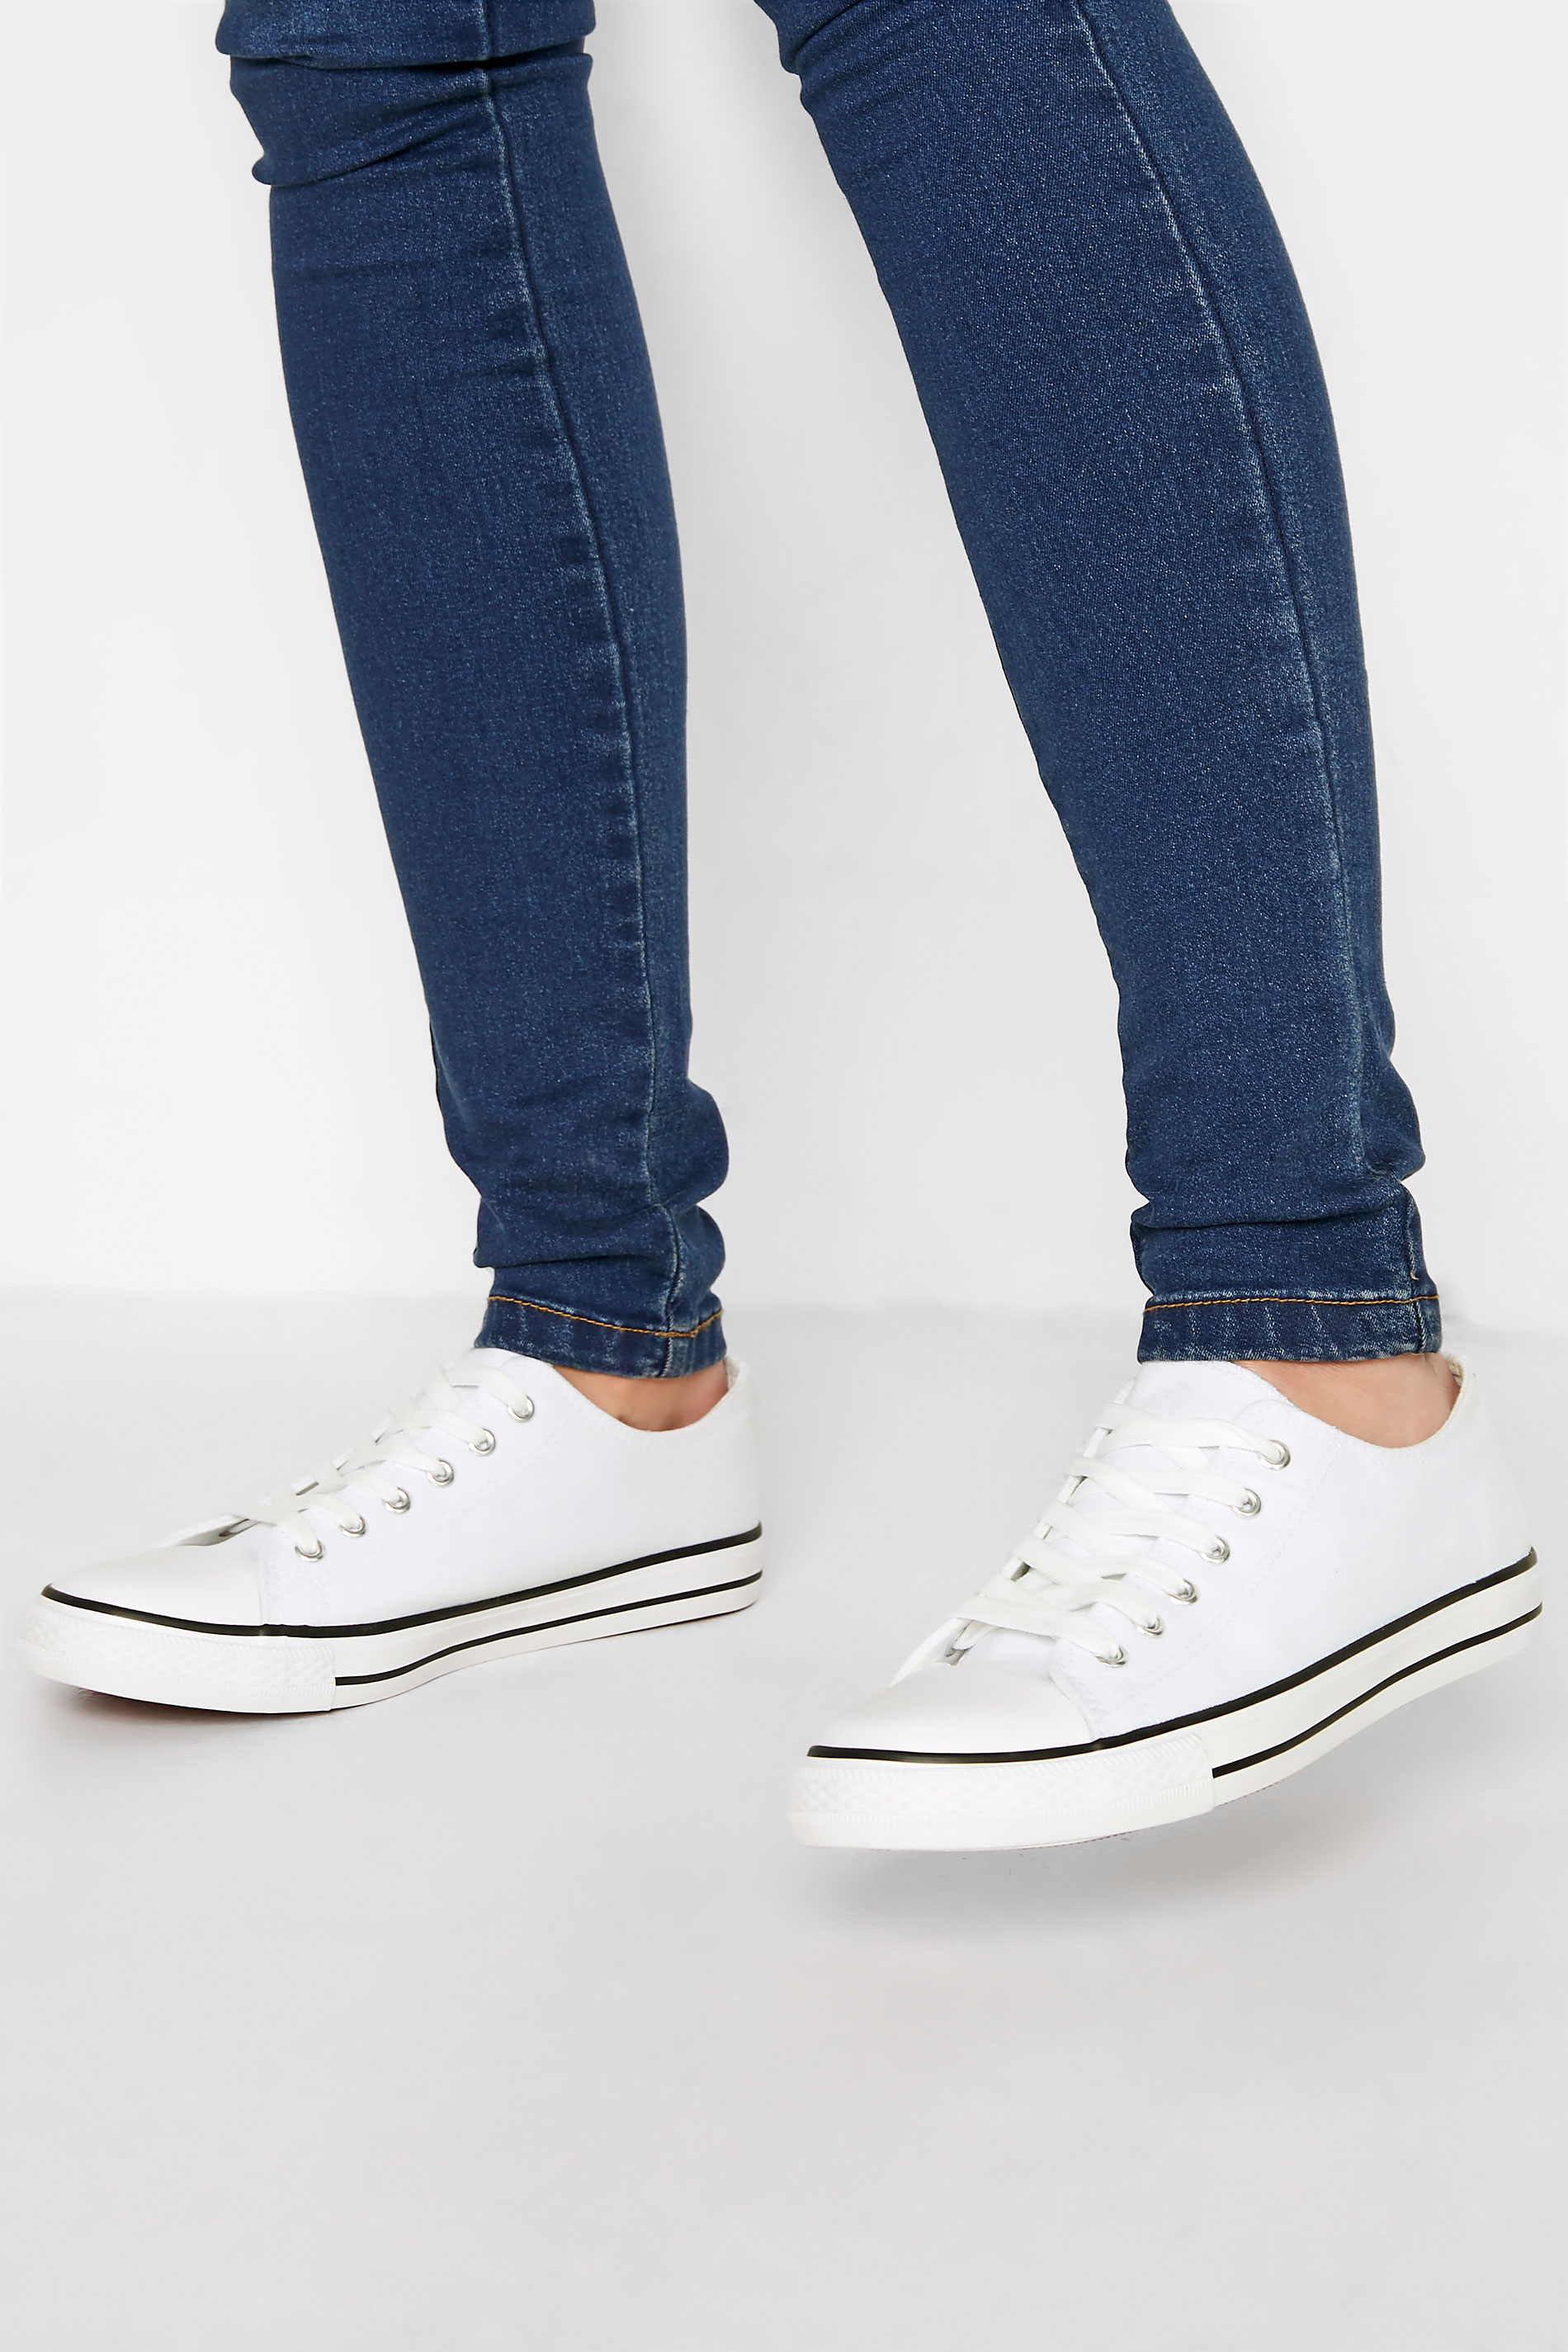 LTS Tall Women's White Canvas Low Trainers | Long Tall Sally  1